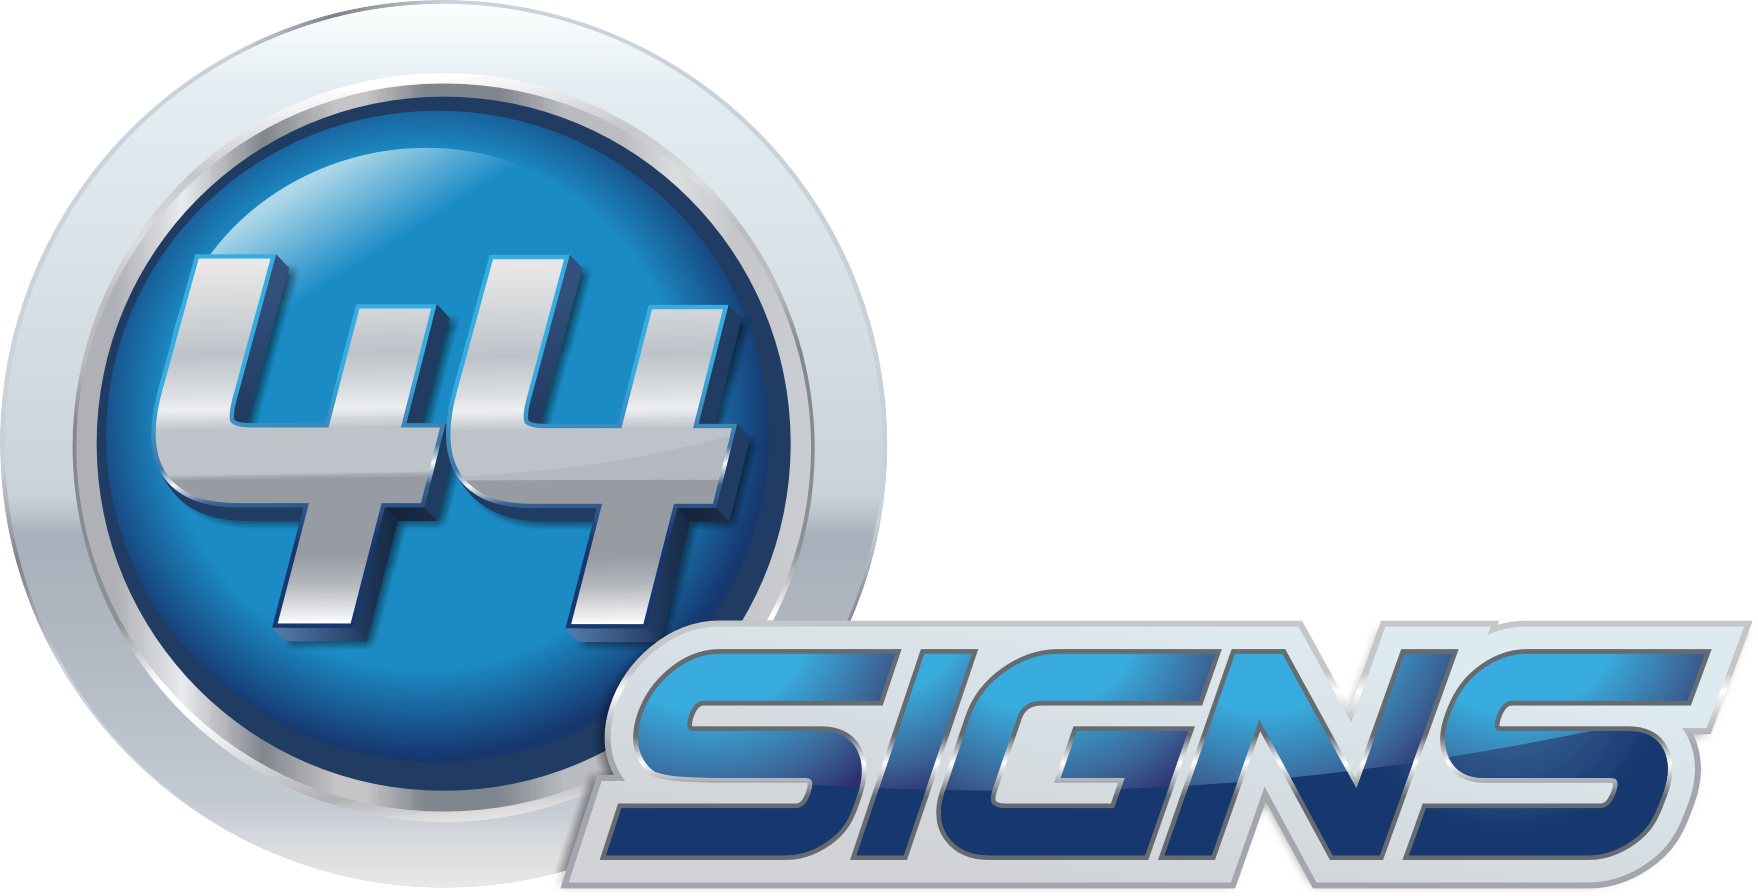 44 Signs logo.png